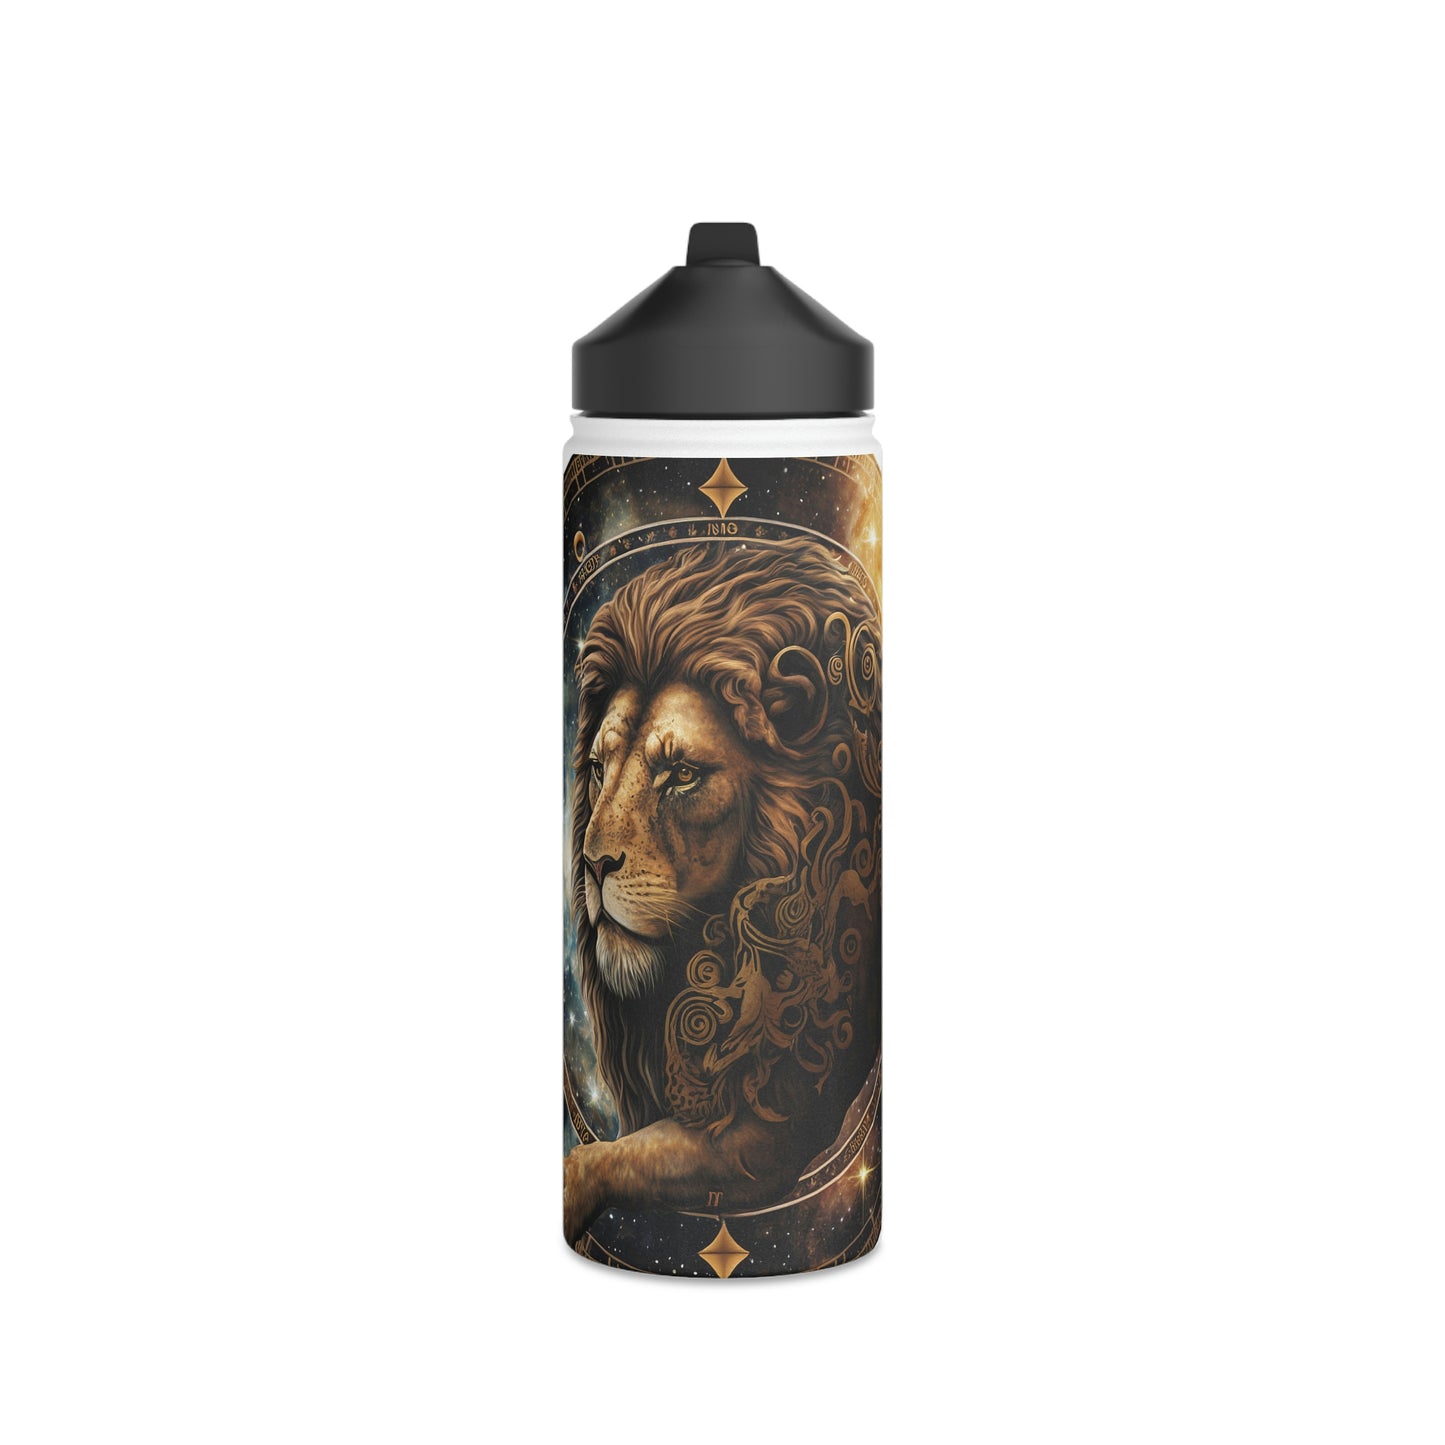 Stainless Steel Insulated Water Bottle - Available in 3 Sizes